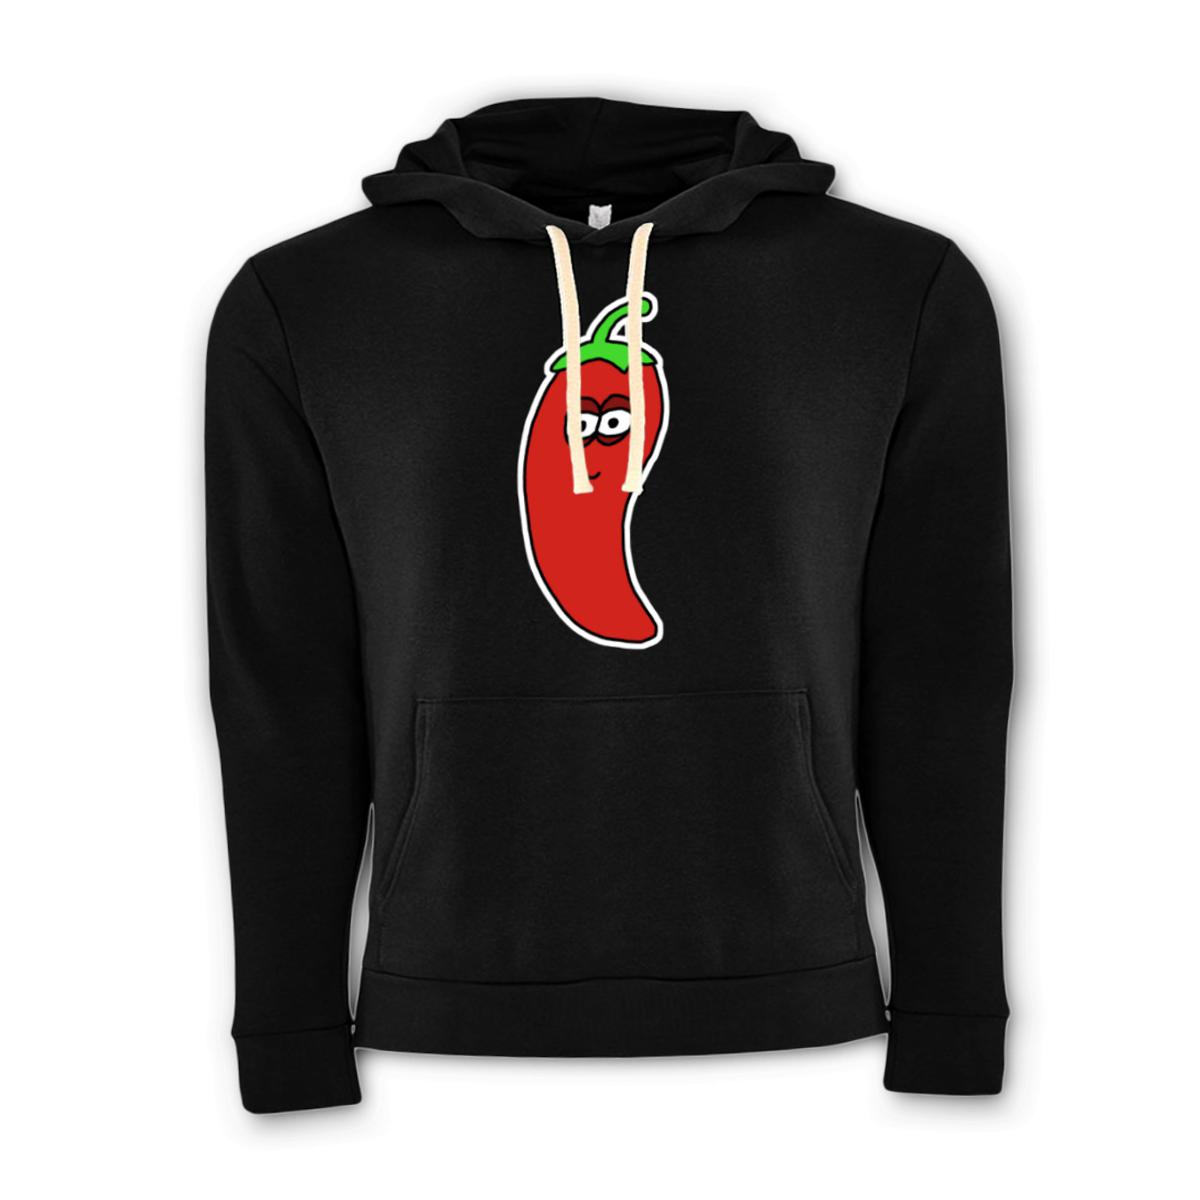 Chili Pepper Unisex Pullover Hoodie Small black